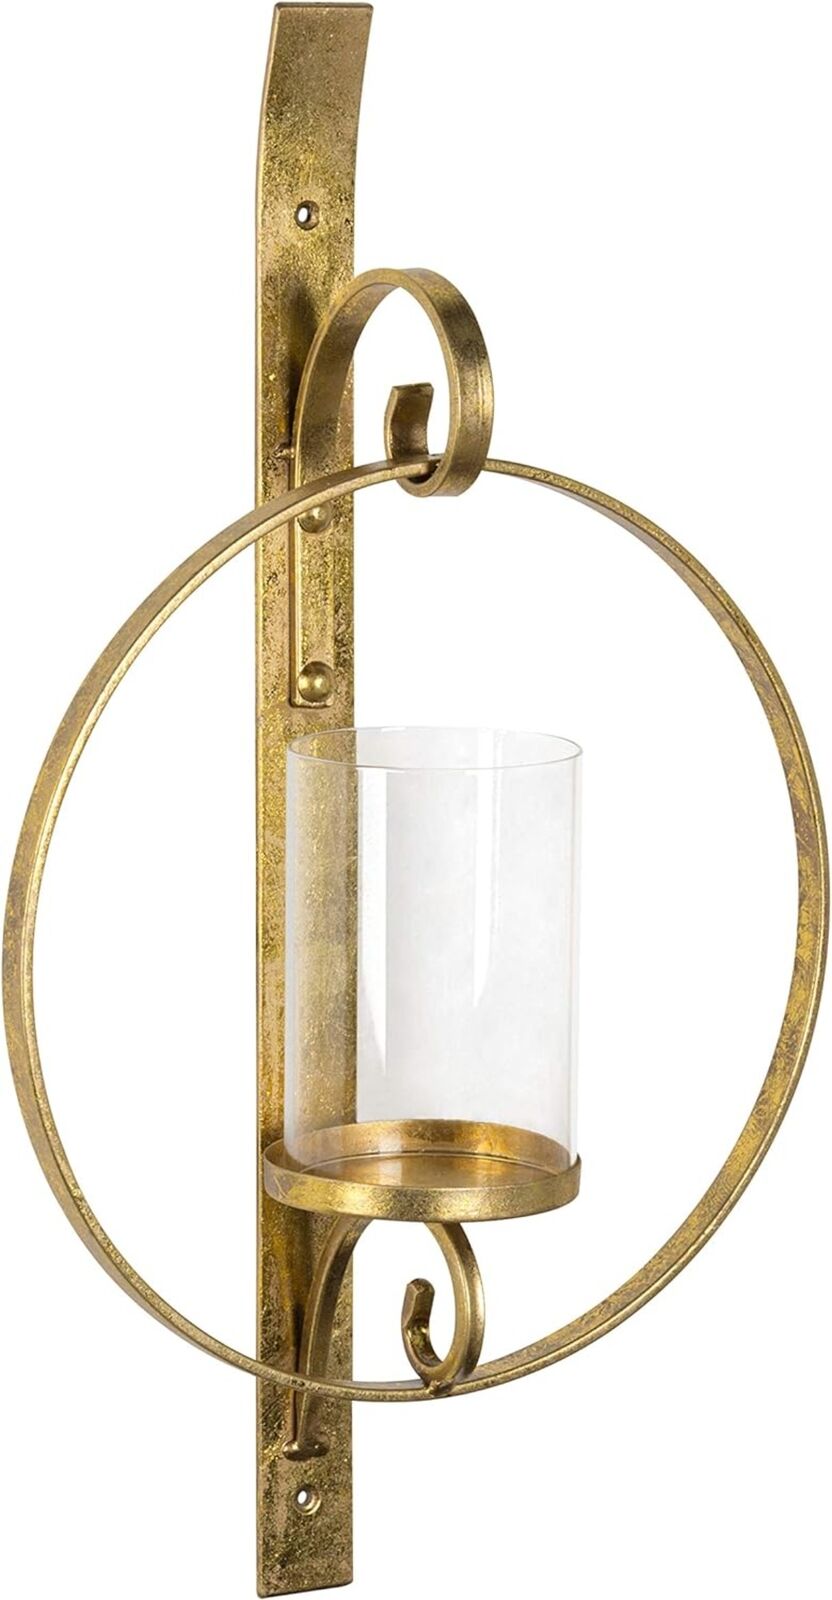 Metal Wall Candle Holder Sconce, Decorative round metal wall sconce, Gold